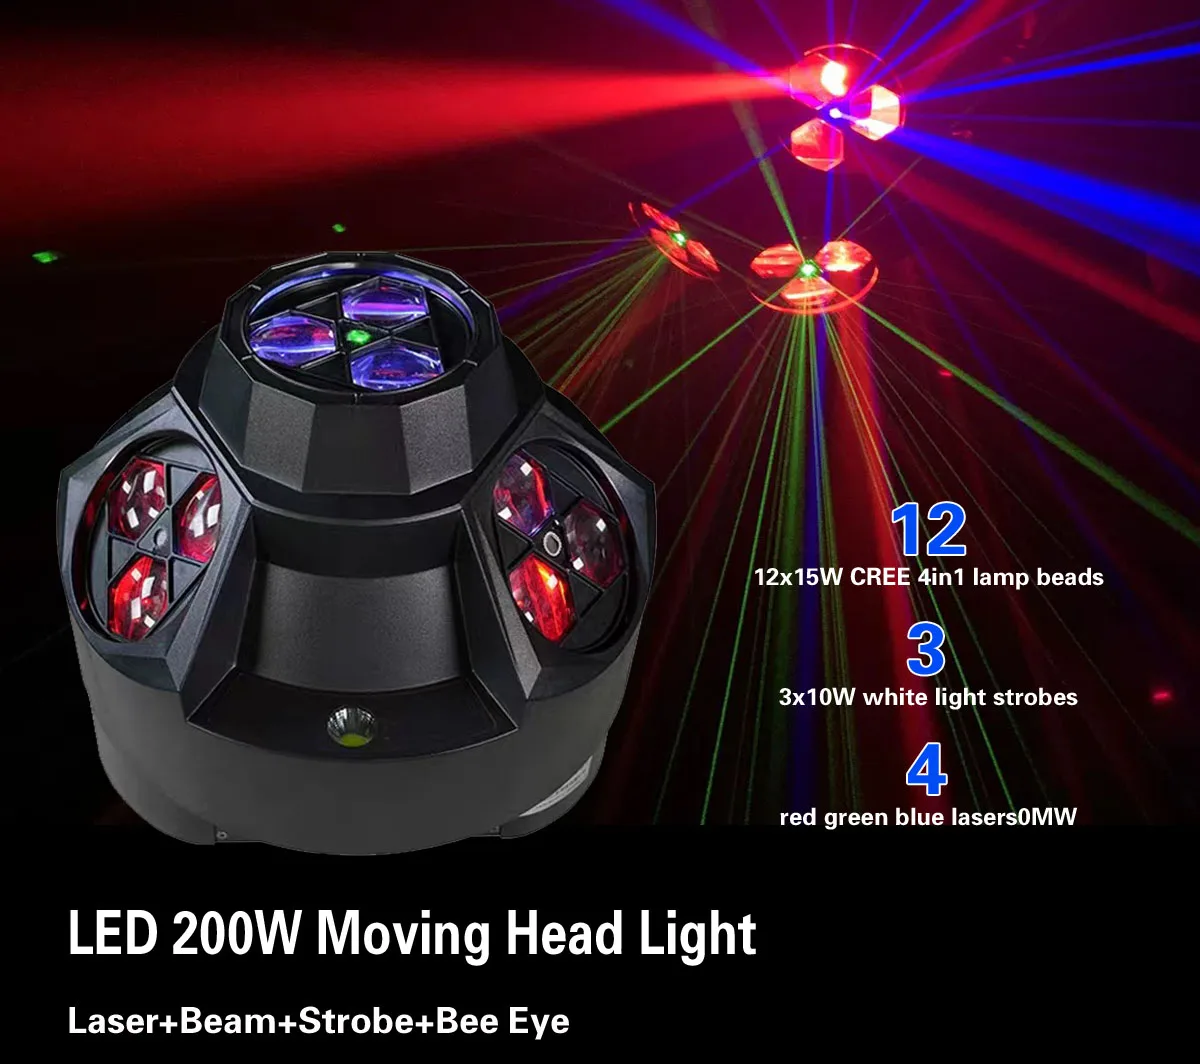 

LED Moving Head Laser Light 200W 4in1 Beam Pattern Strobe Lights RGBW Bee Eye Rotating For DJ Disco Bar Party Wedding DMX Stage